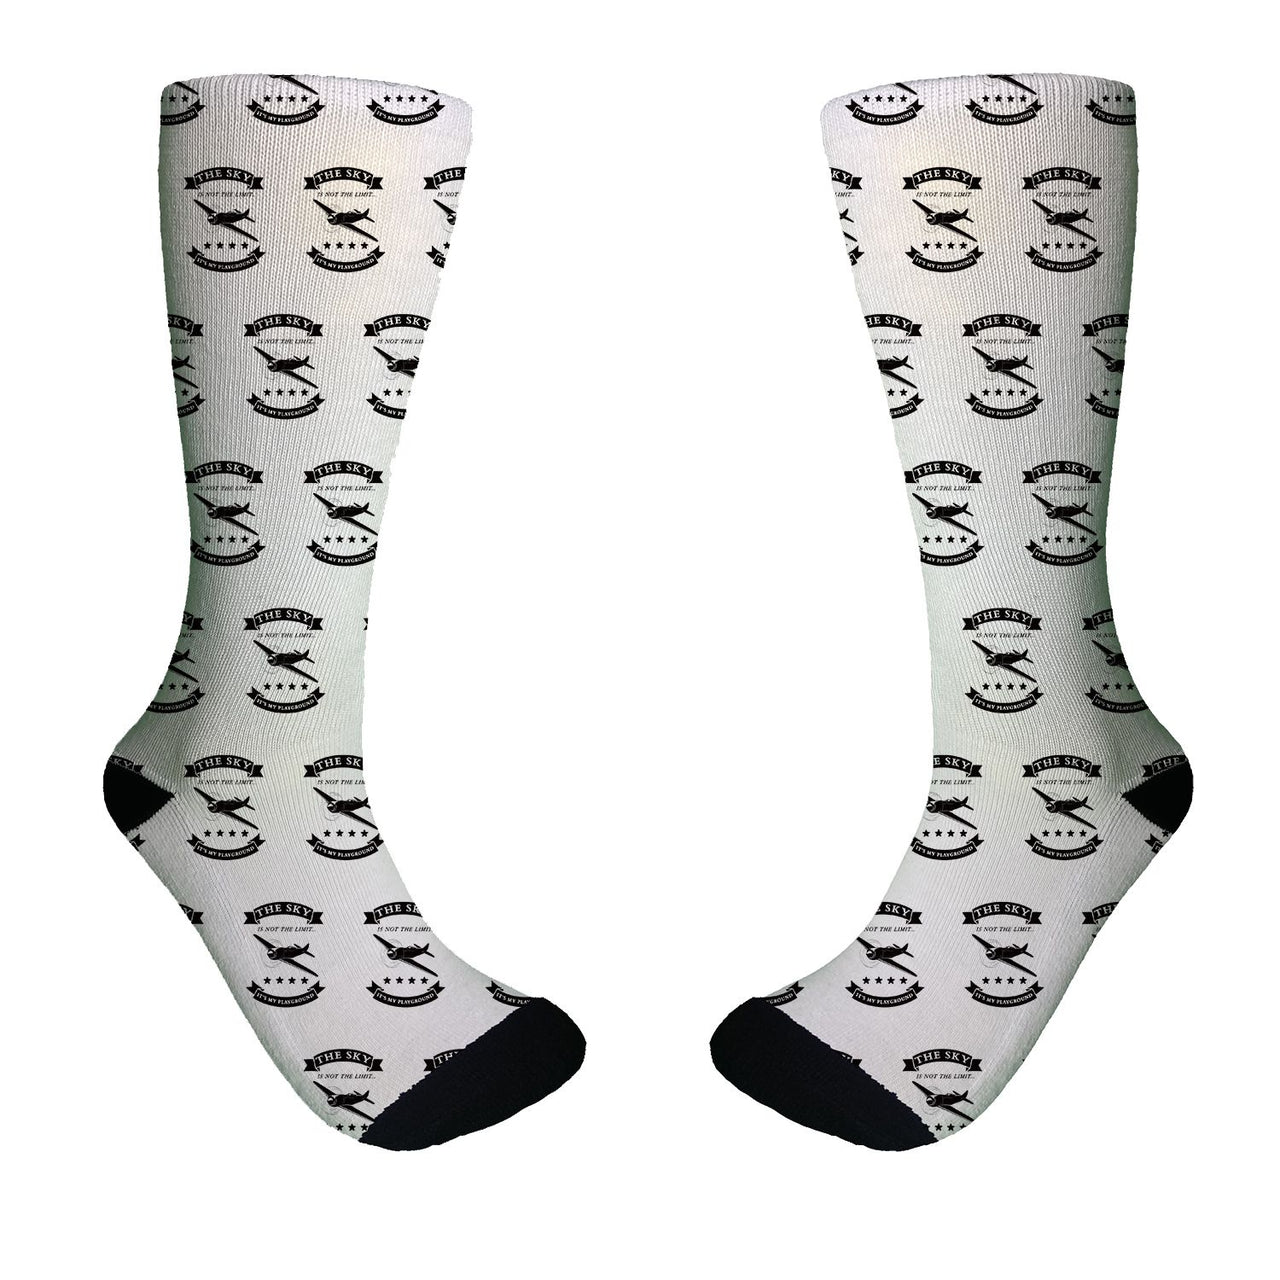 The Sky is not the limit, It's my playground Designed Socks